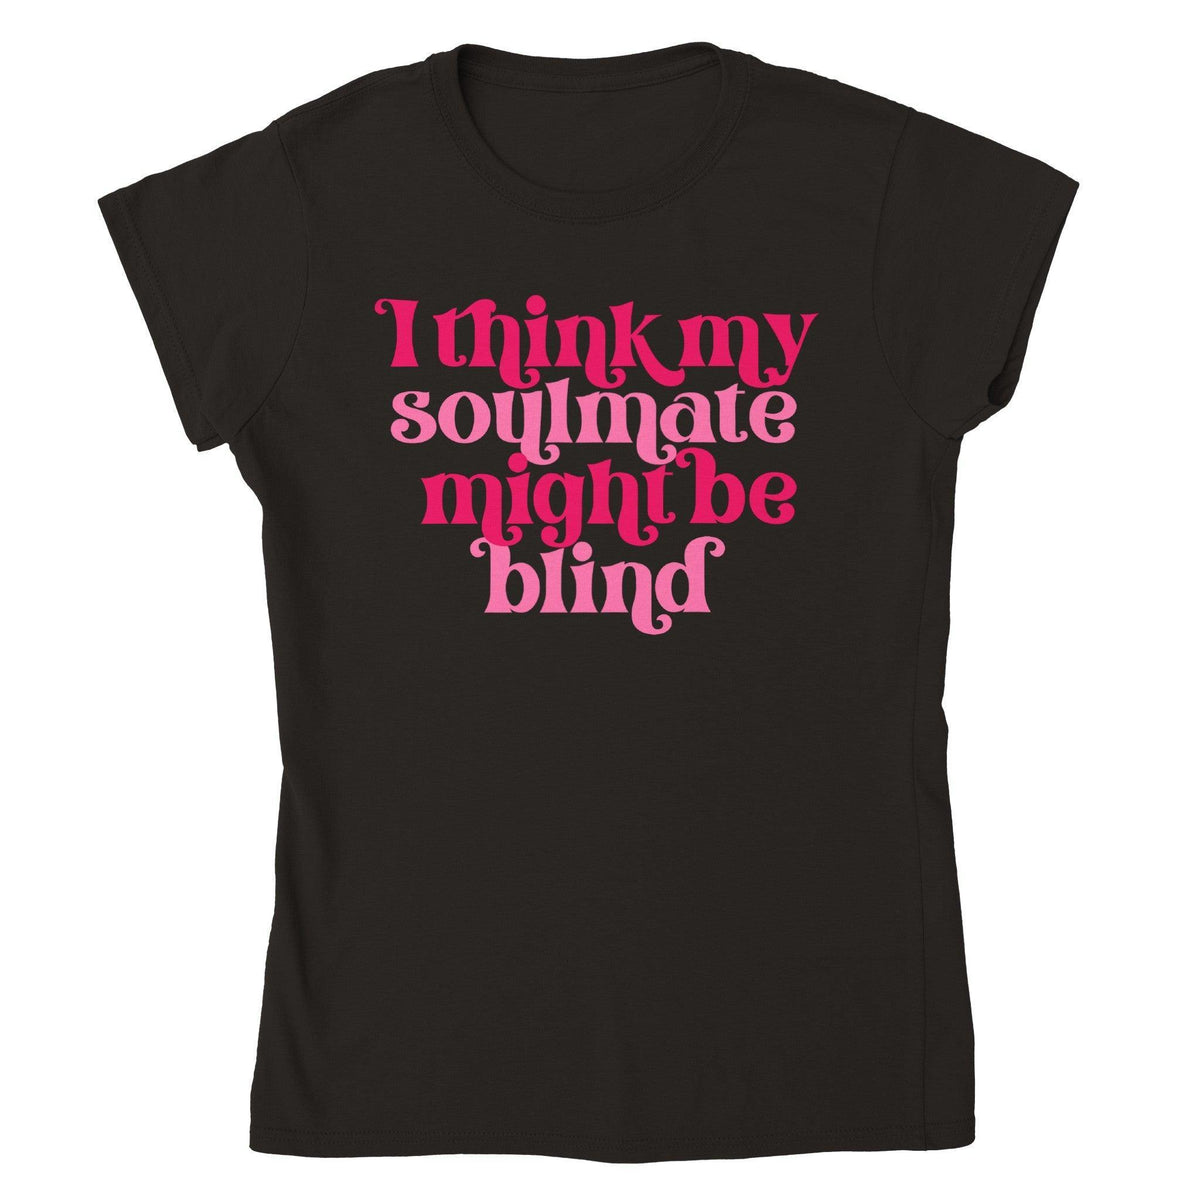 MY SOULMATE MAY BE BLIND T-shirt-Regular Fit Tee-StylinArts